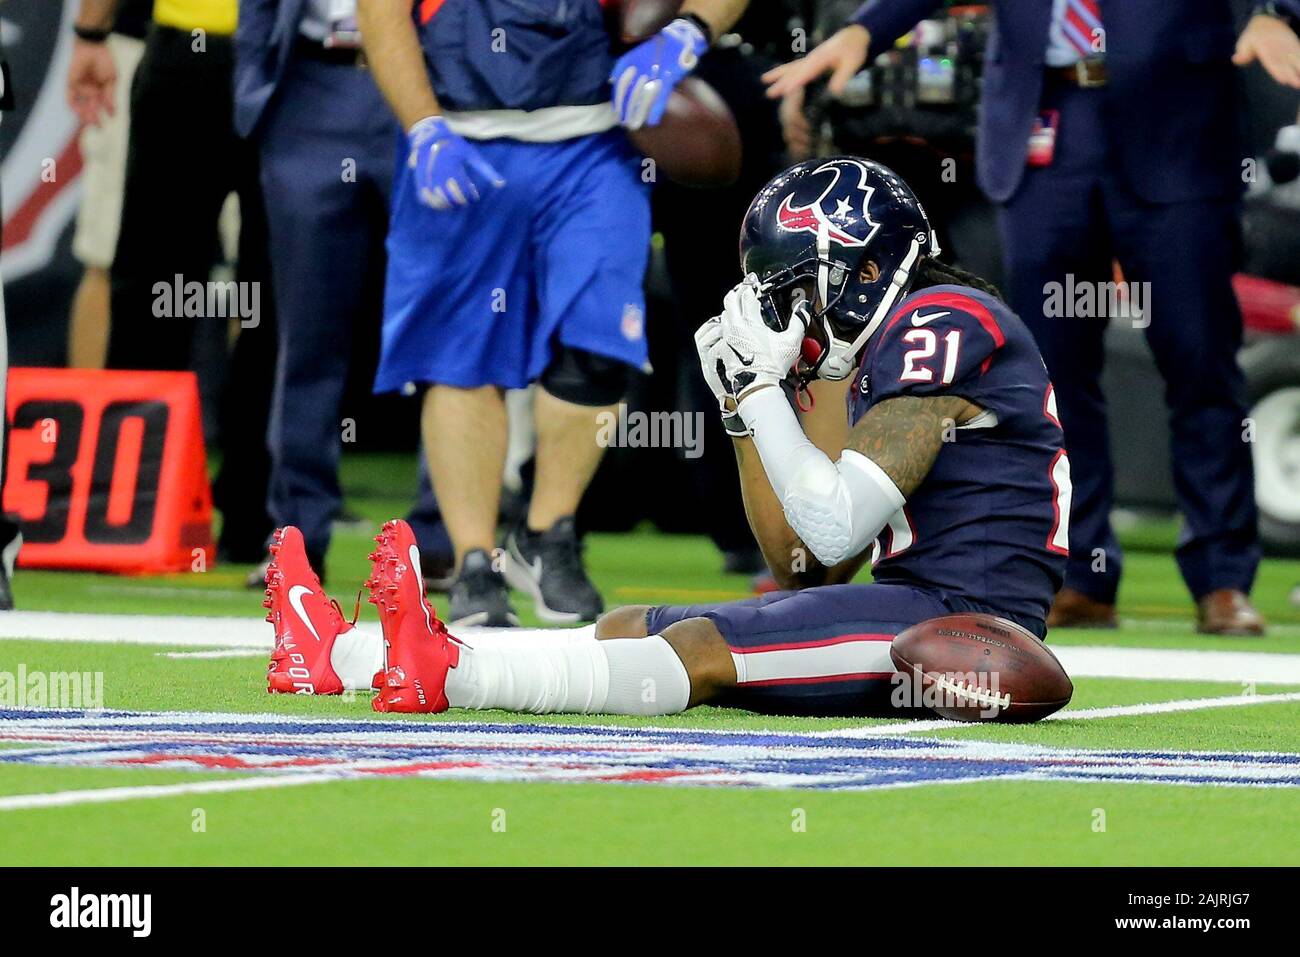 Houston, Texas, USA. 4th Jan, 2020. Houston Texans cornerback Bradley Roby (21) after failing to make an interception during the AFC Wild Card playoff game between the Houston Texans and the Buffalo Bills at NRG Stadium in Houston, TX on January 4, 2020. Houston won in overtime, 22-19, to advance to the AFC Divisional Round. Credit: Erik Williams/ZUMA Wire/Alamy Live News Stock Photo